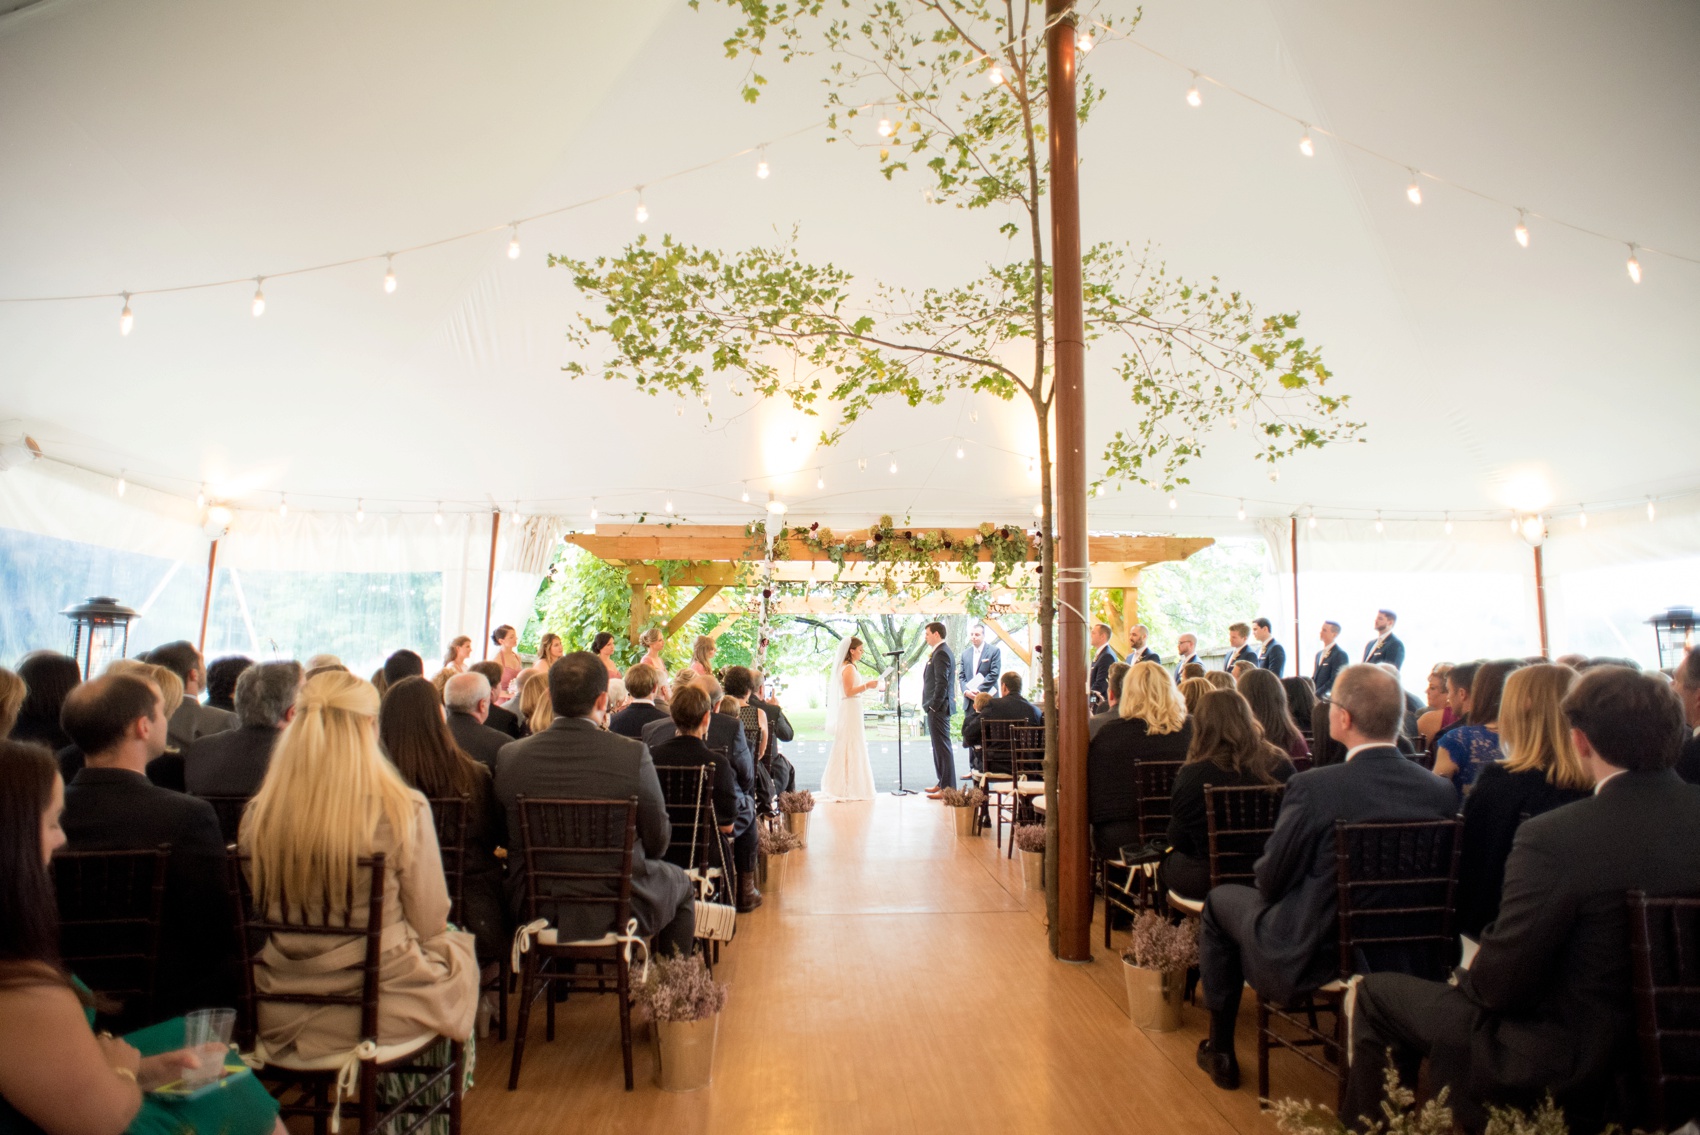 A Red Maple Vineyard wedding ceremony. Photo by NYC wedding photographer Mikkel Paige Photography.